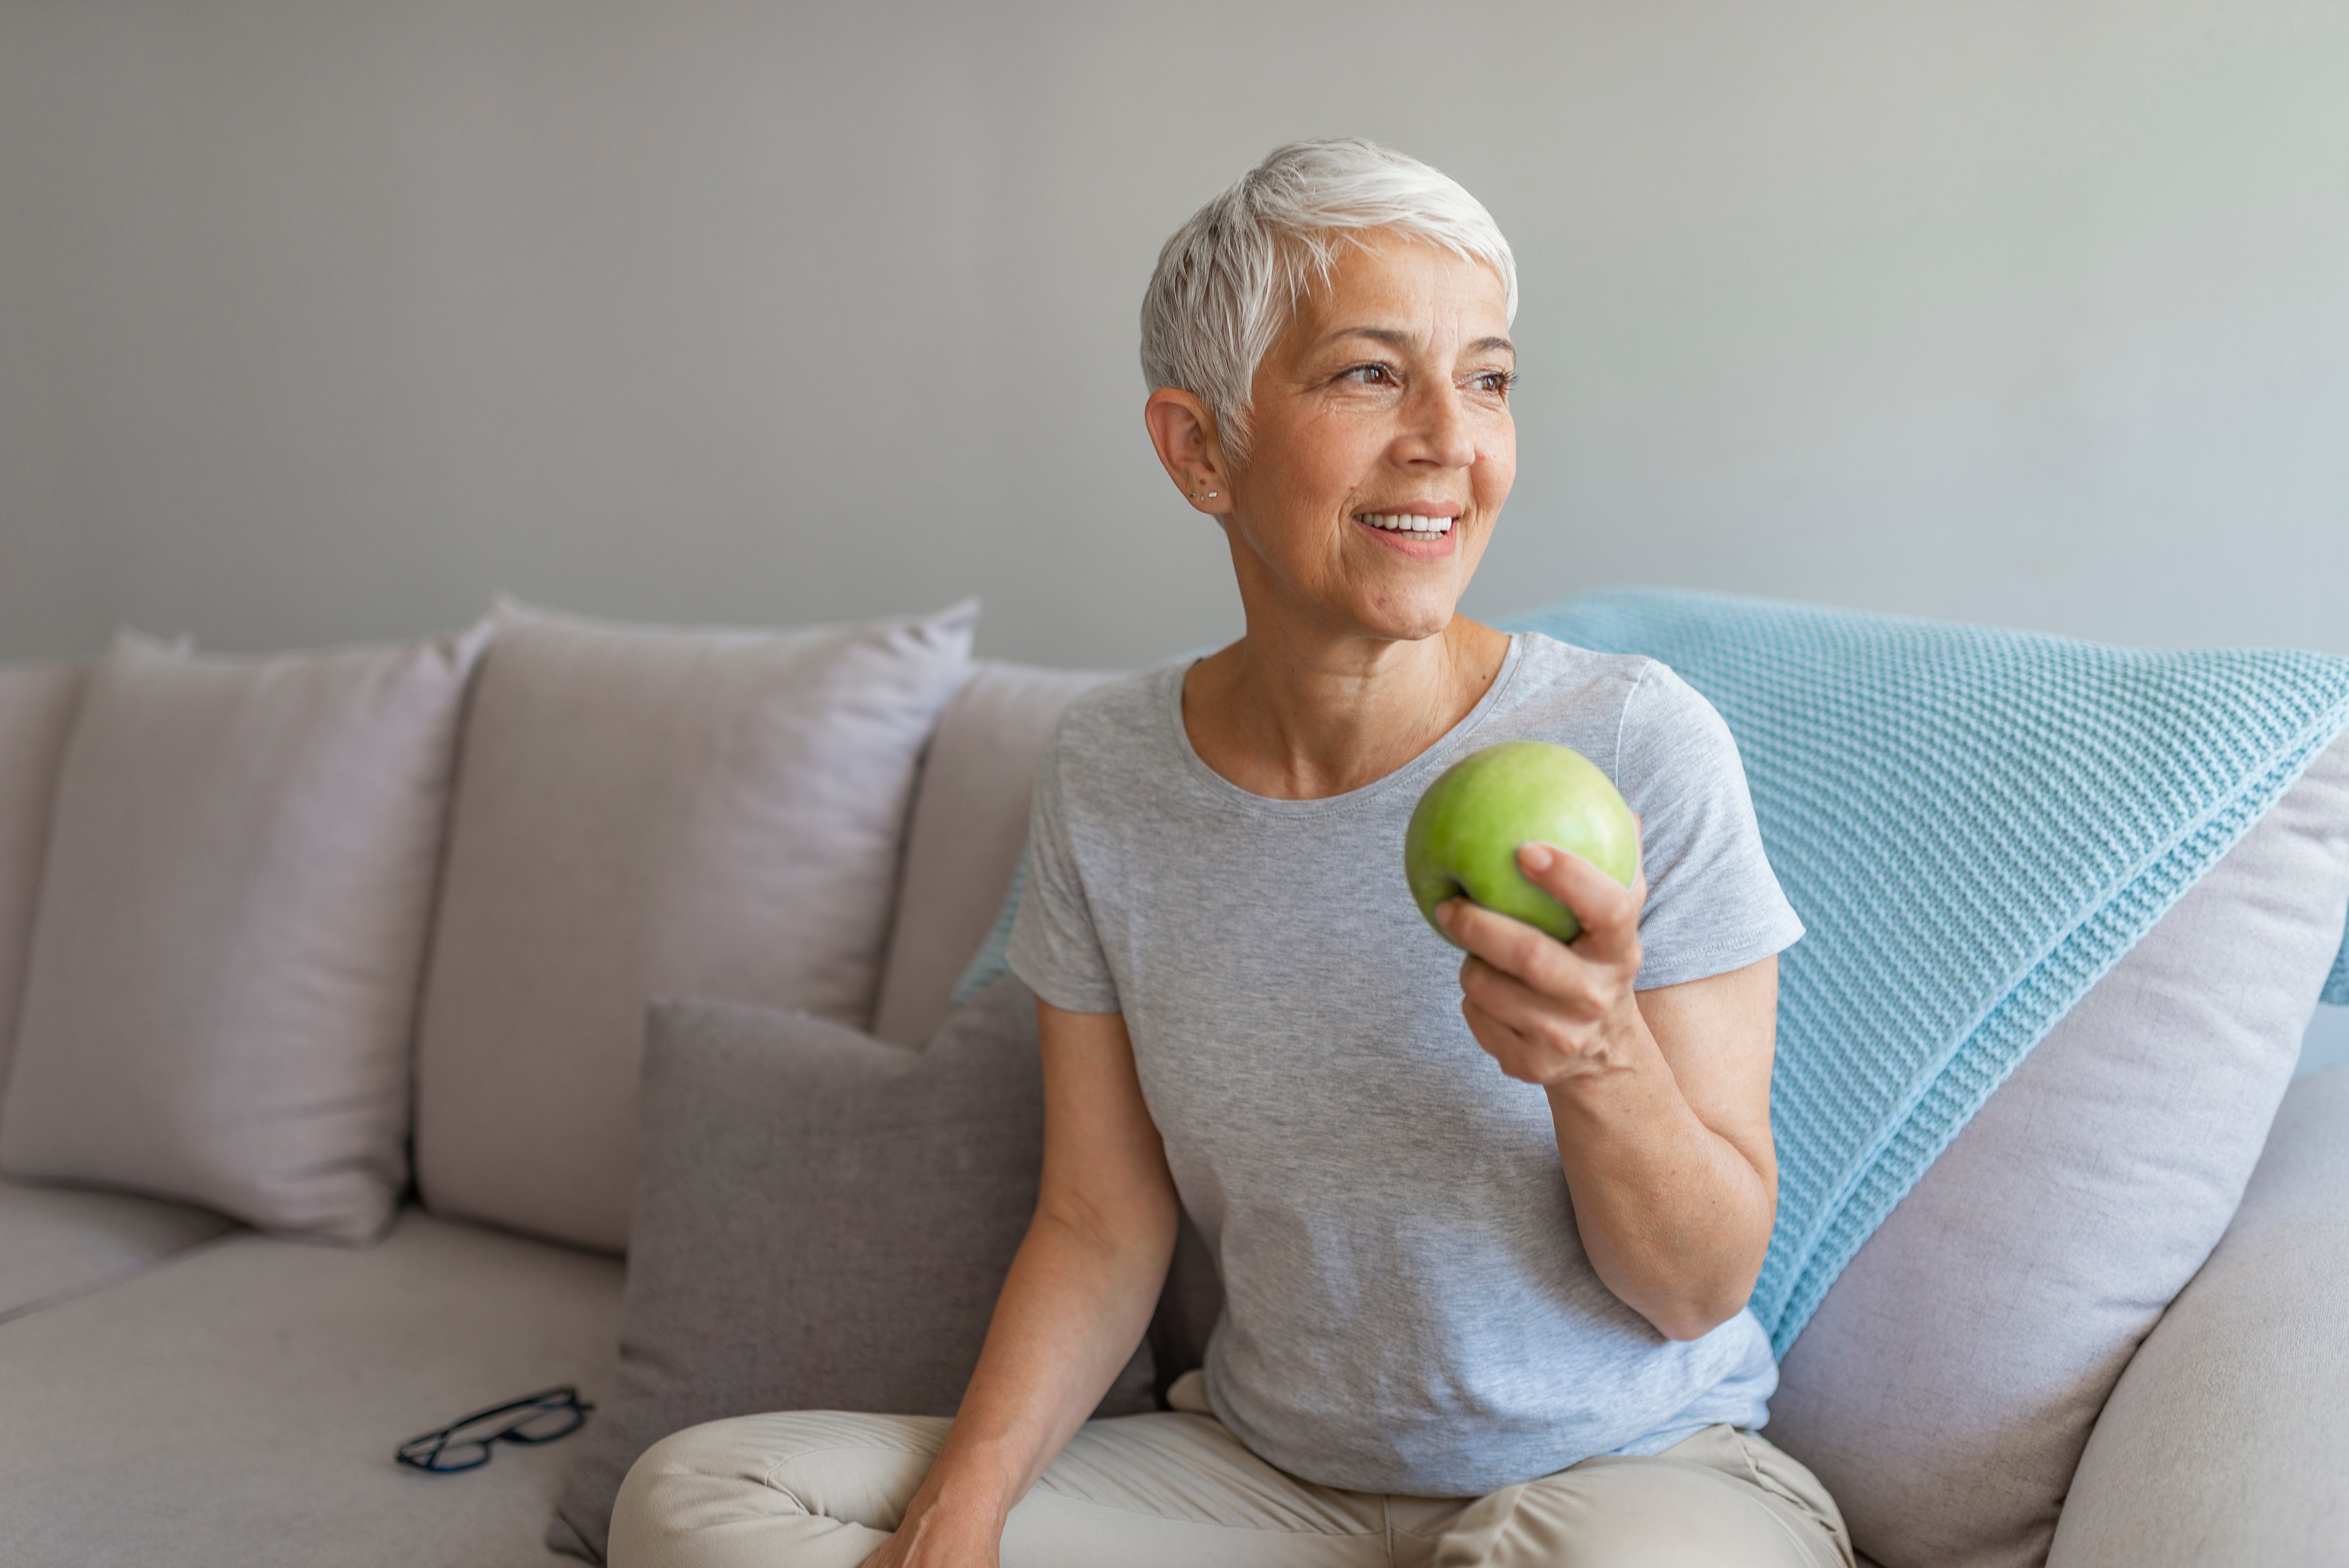 Woman sitting on couch smiling and eating an apple